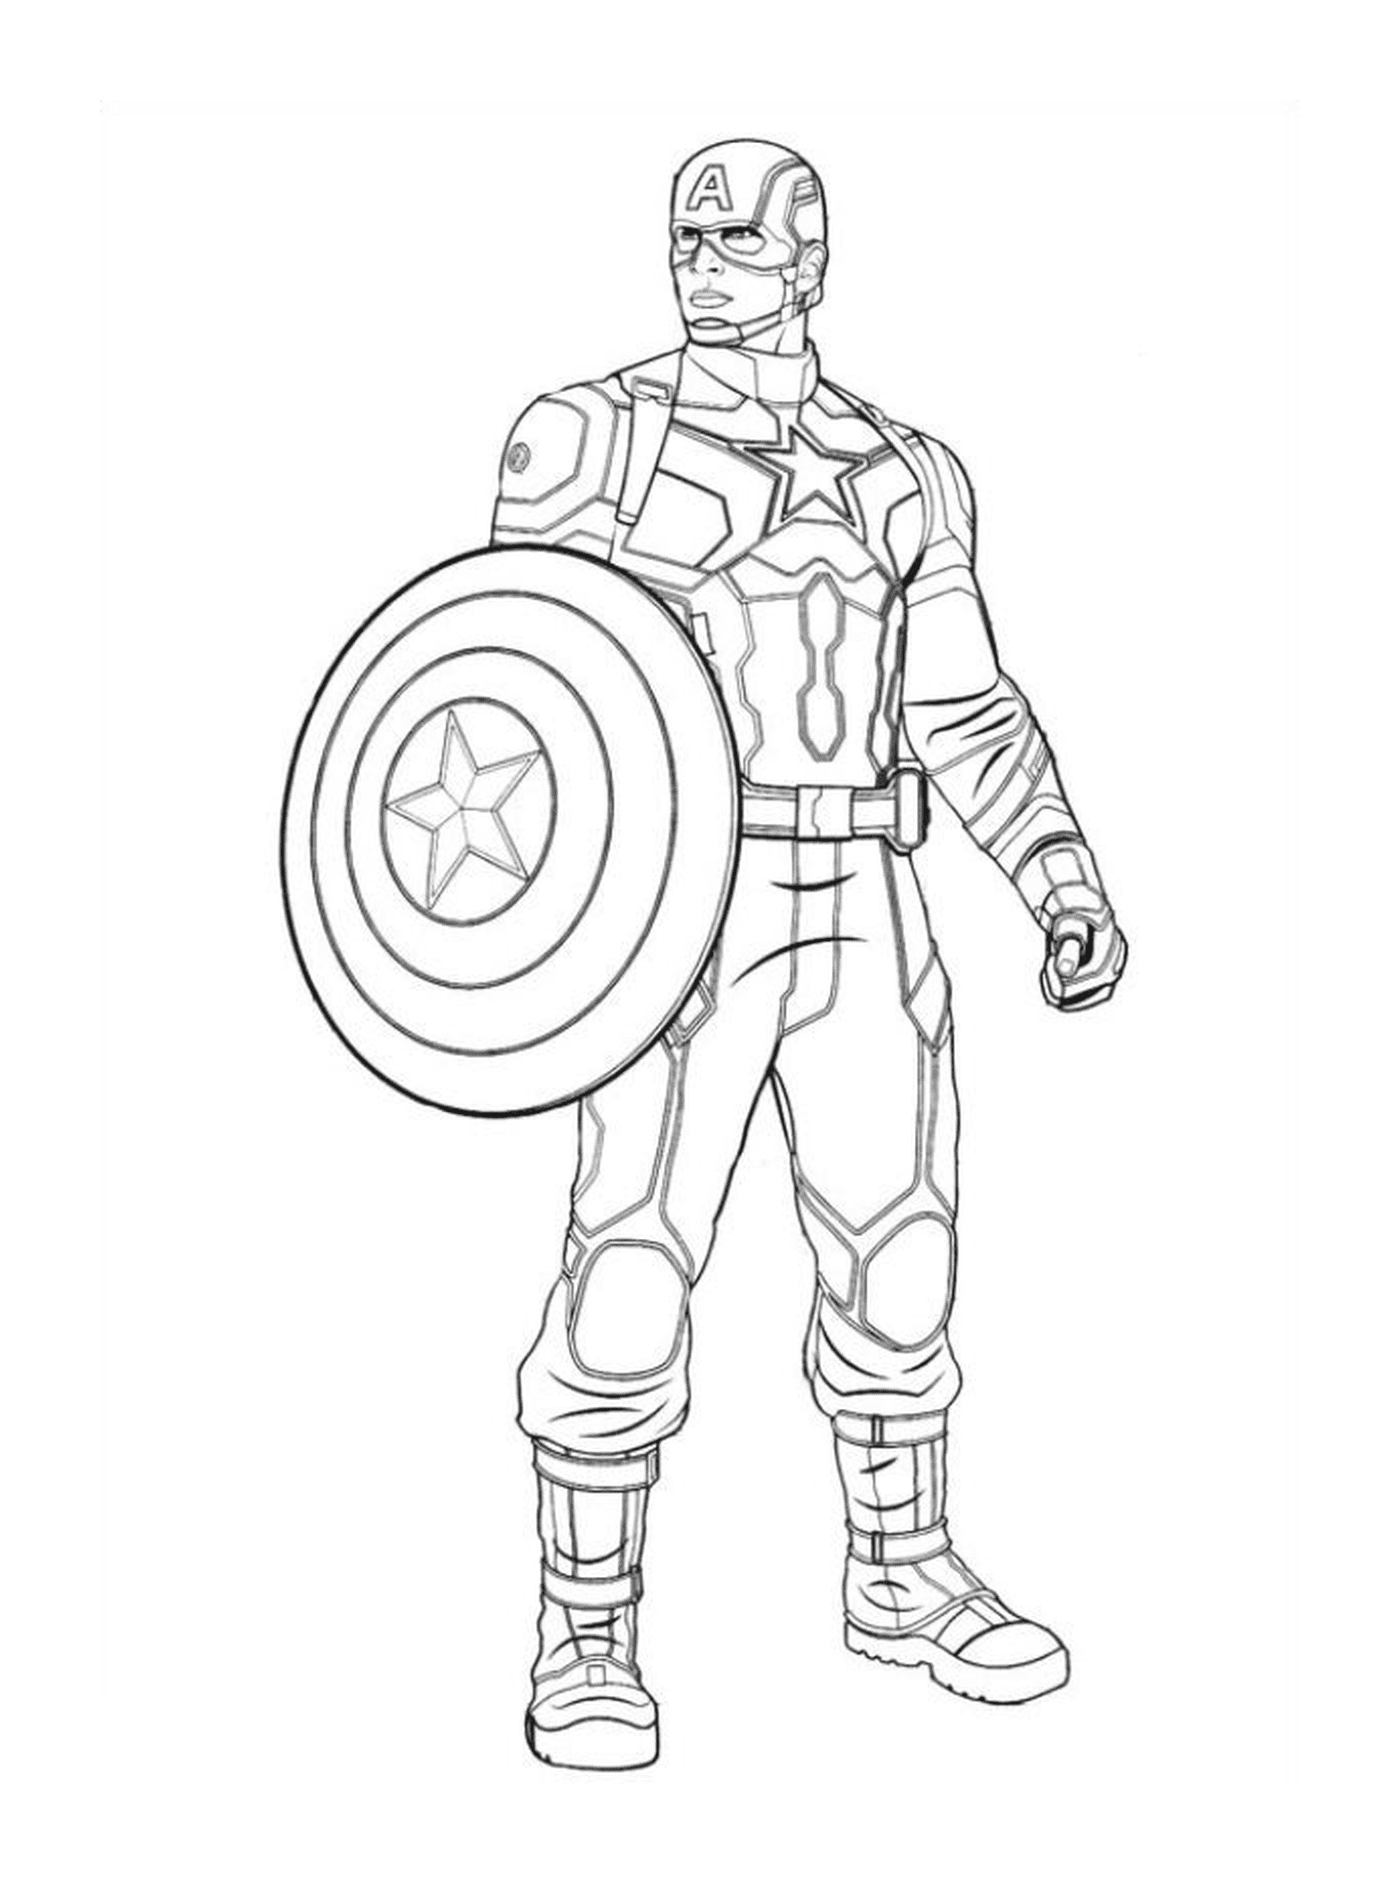  a man holding a shield (image not related to Captain America) 